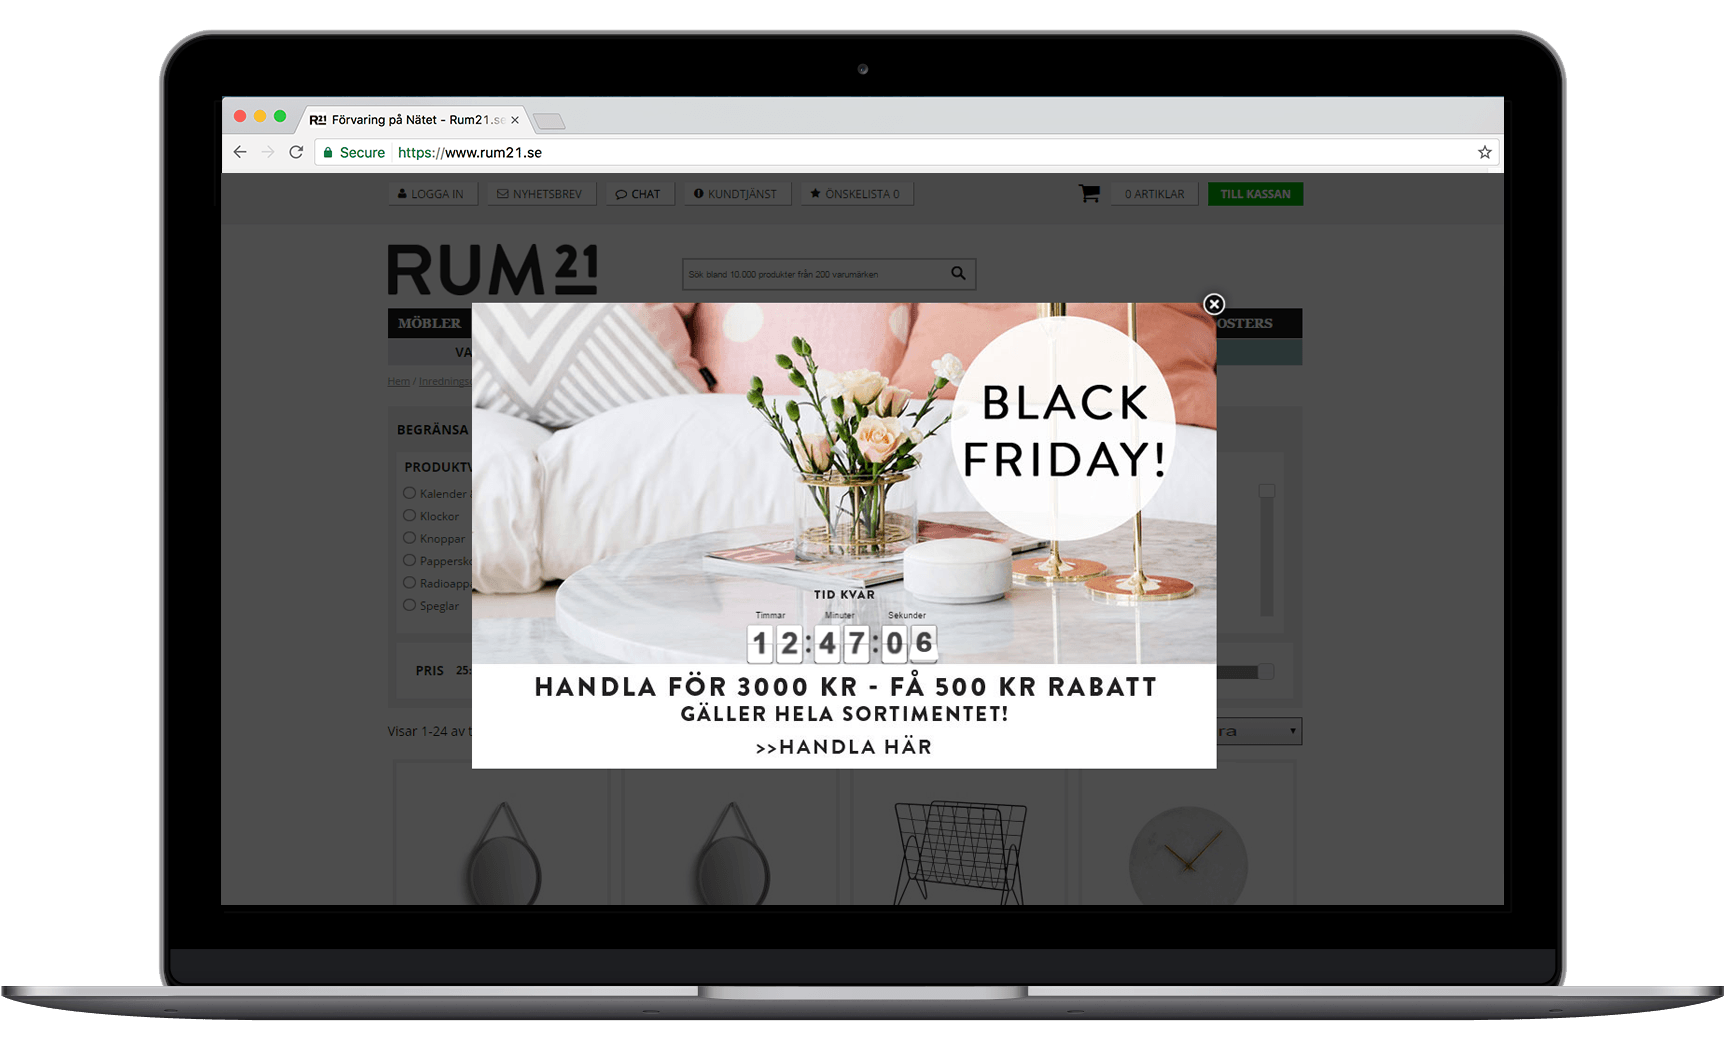 Homewear retailer Rum21 use a countdown timer on Black Friday